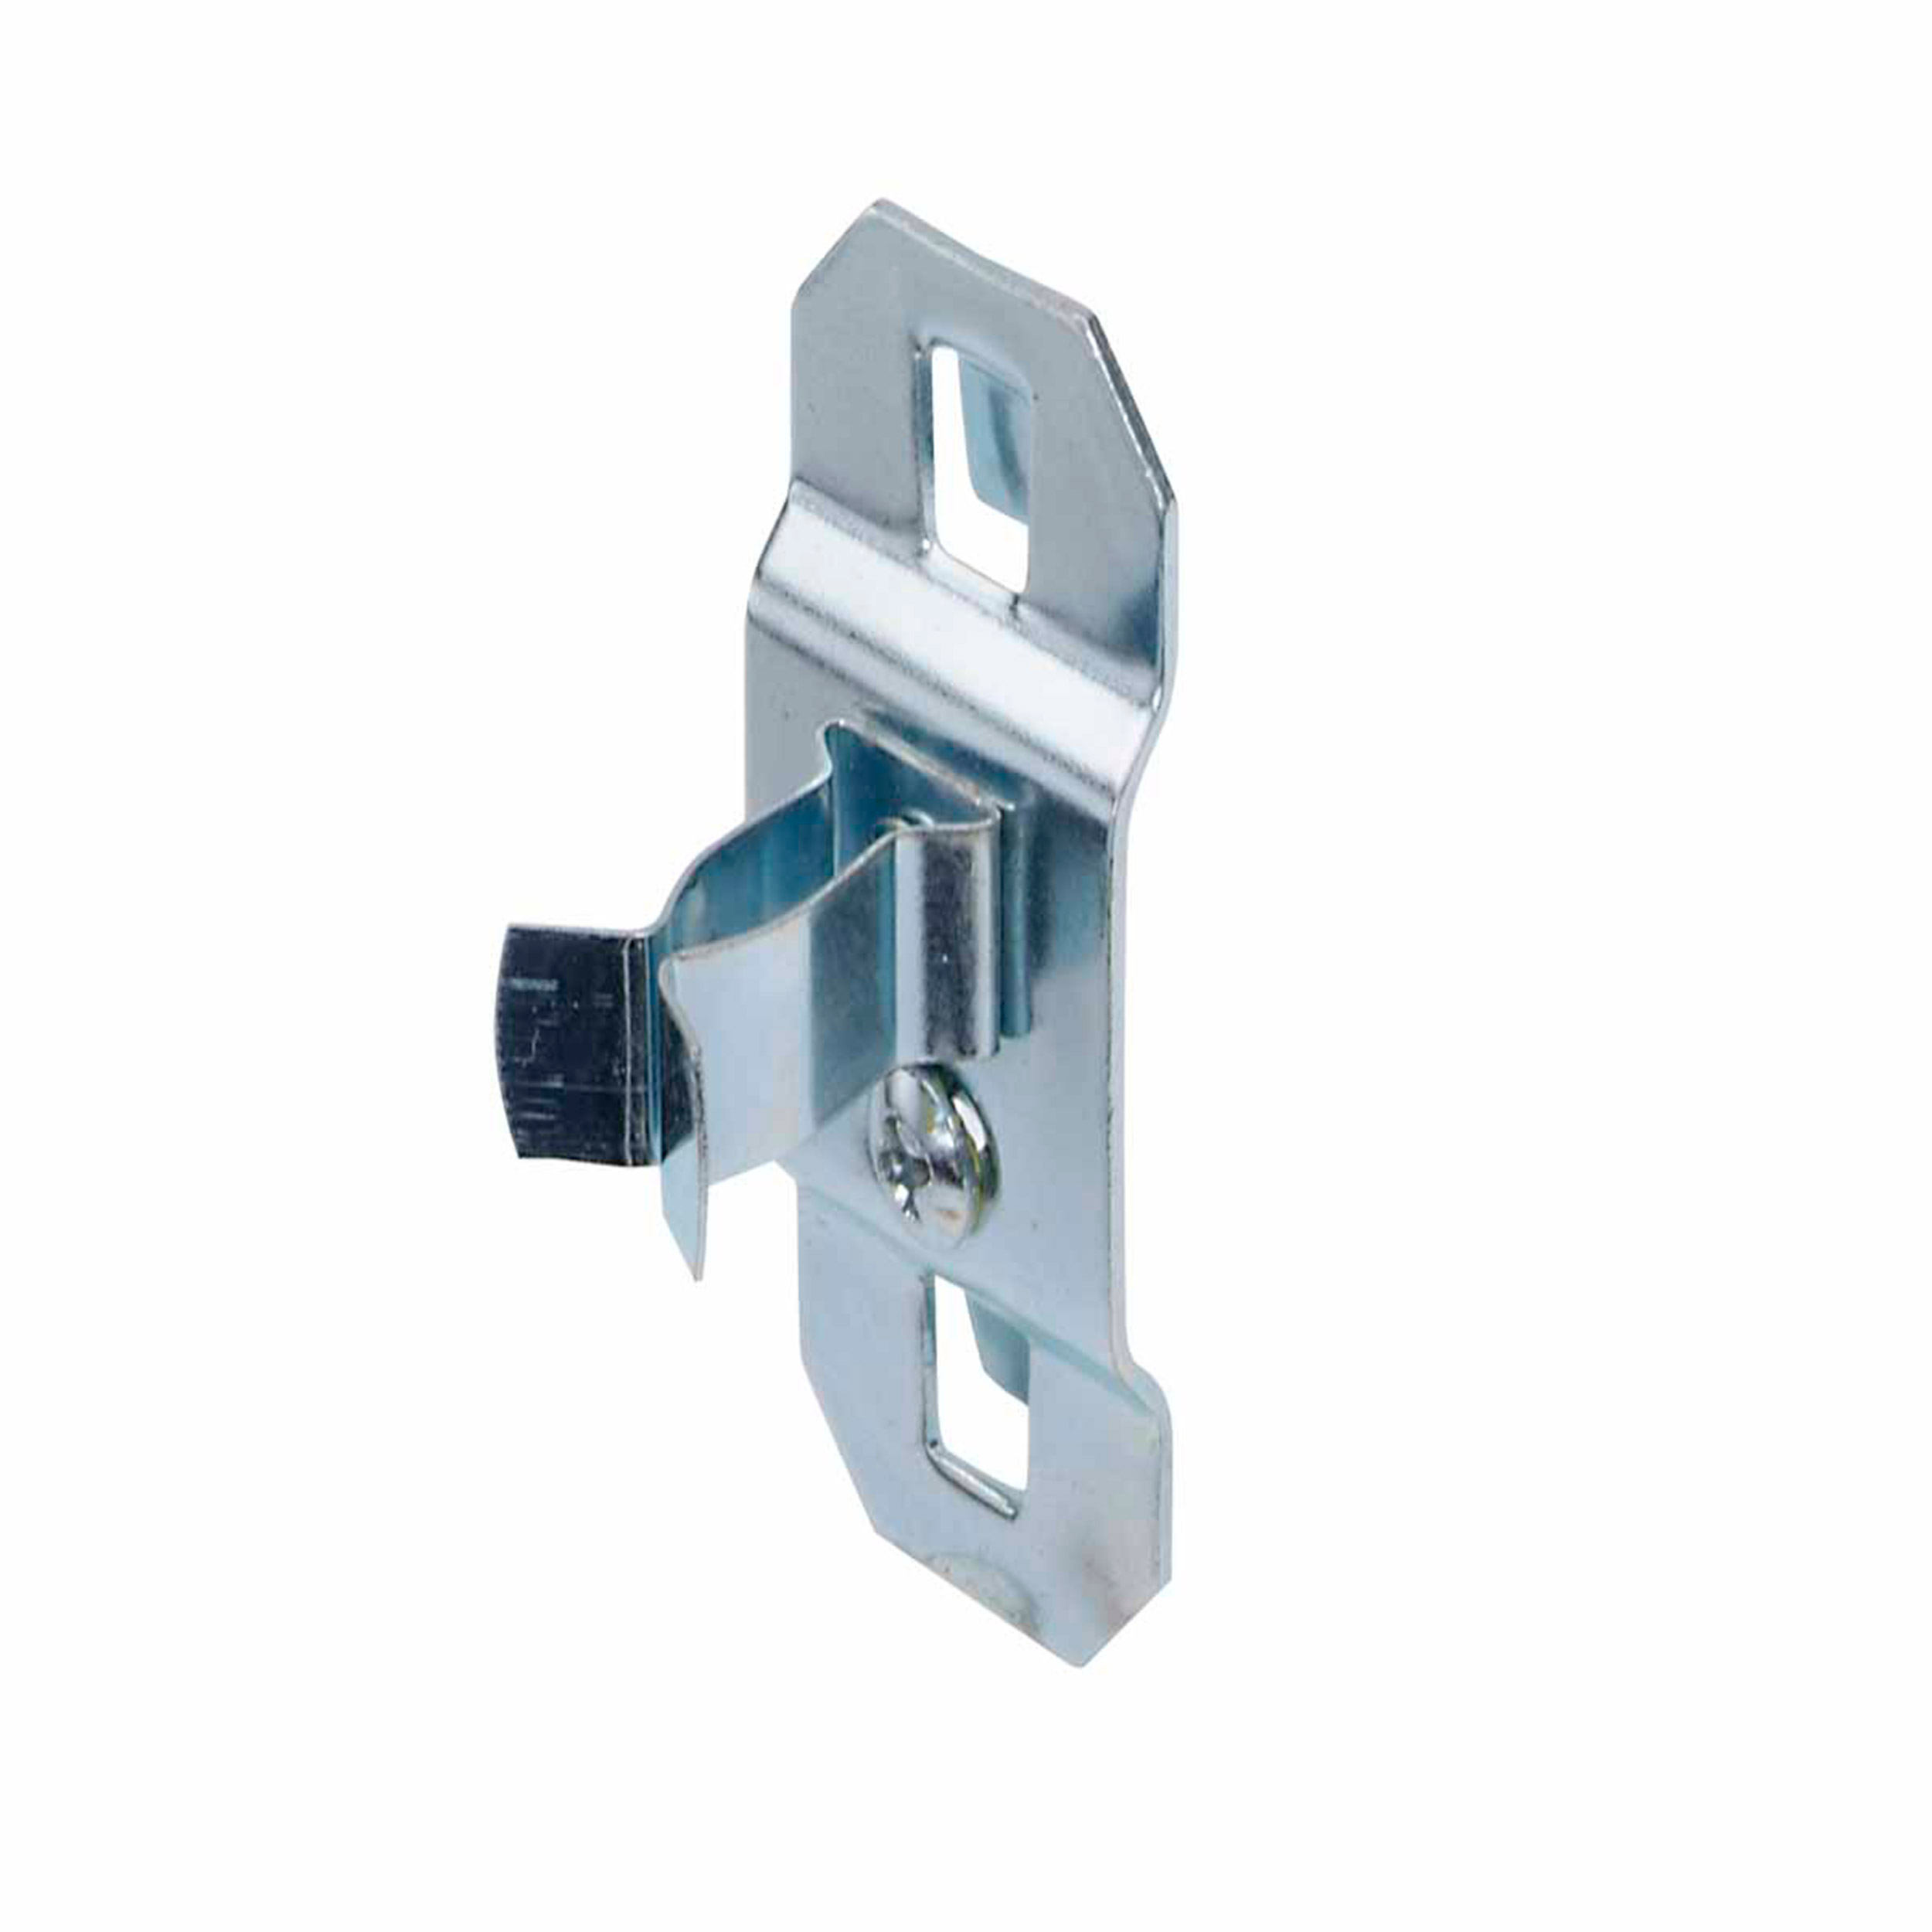 1/4 In. To 1/2 In. Hold Range 7/8 In. Projection, Zinc Plated/chromate Dipped Steel Extended Spring Clip For Locboard, 5